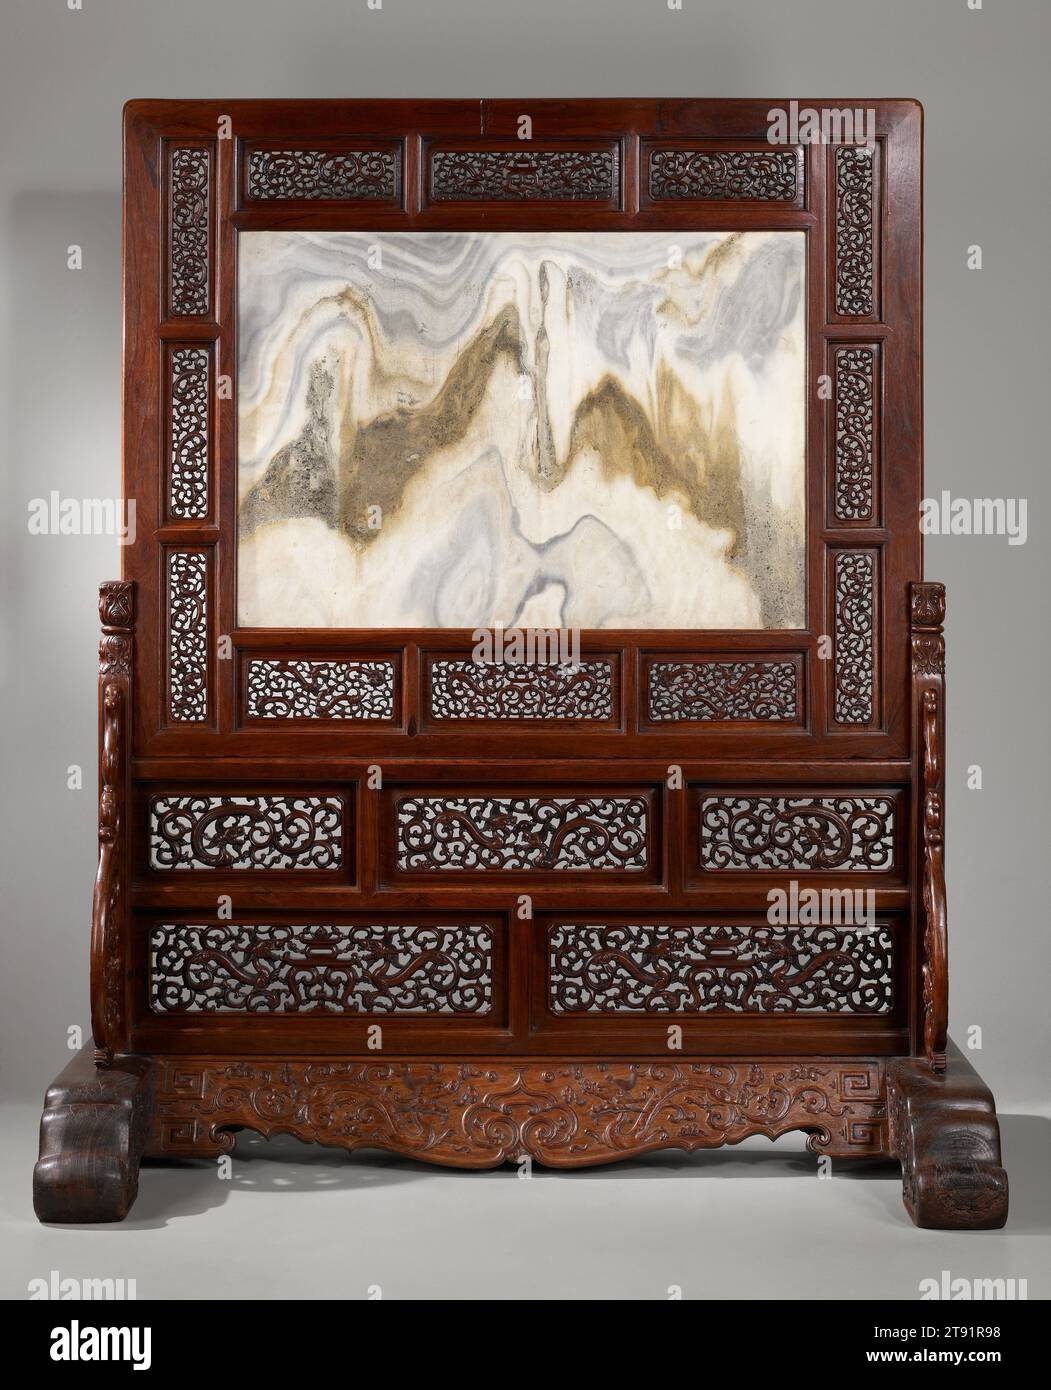 Screen, 17th century, Unknown, 84 3/4 x 70 1/2 x 41 1/2 in. (215.27 x 179.07 x 105.41 cm), Huang-hua-li, tie-li-mu, and ta-li marble, China, 17th century, Large screens are probably the rarest category of surviving Ming style furniture. Solid panel screens were placed inside the main entrance to buildings where they provided privacy and protection from draughts while dispelling negative cosmic energy (ch'i) seeking to harm the occupants within. They were also used as honorific backdrops for the chairs or thrones of important individuals Stock Photo